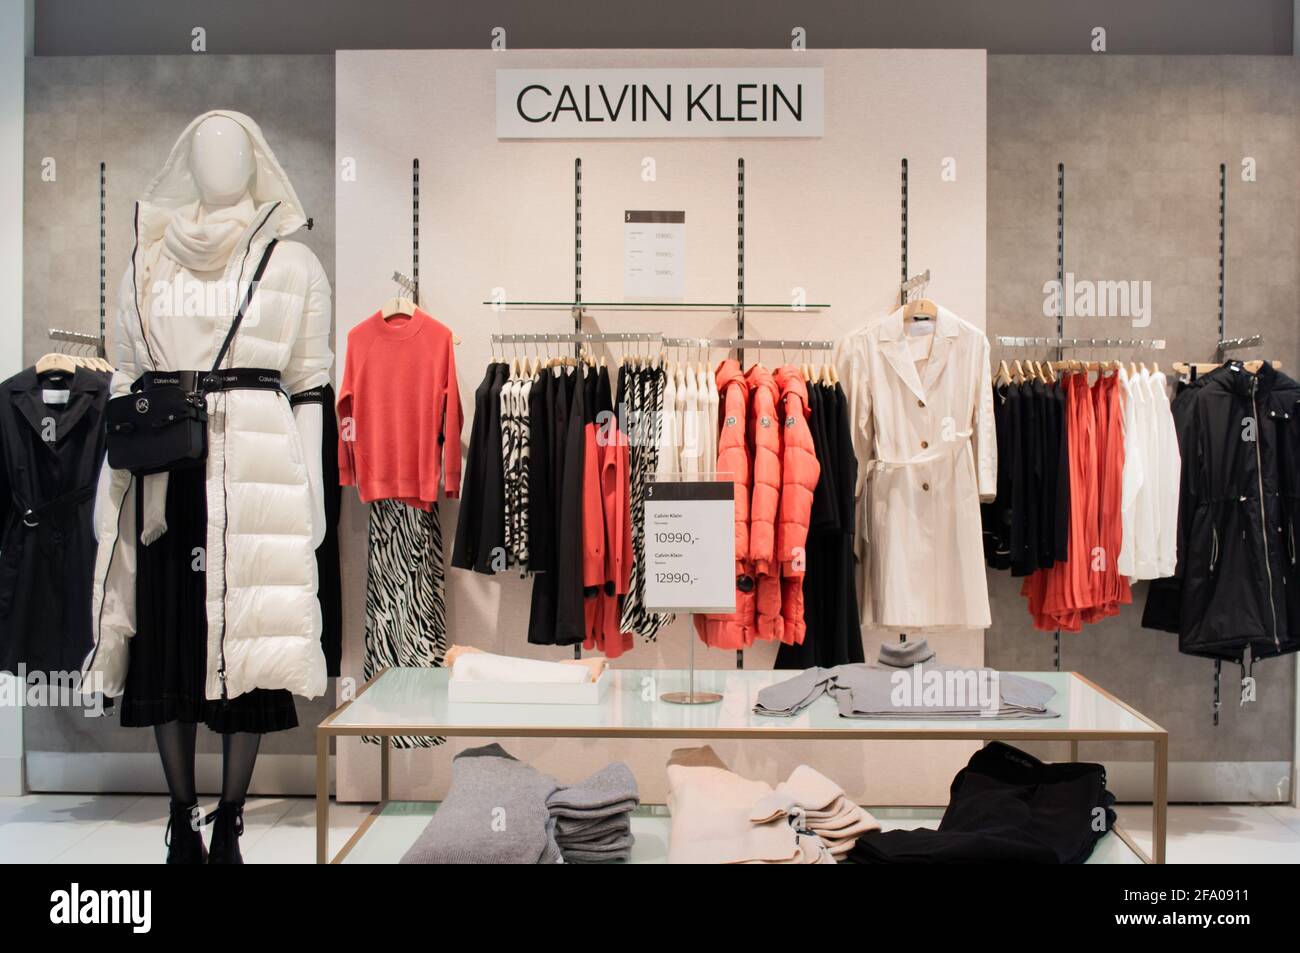 Calvin Klein Brand High Resolution Stock Photography and Images - Alamy